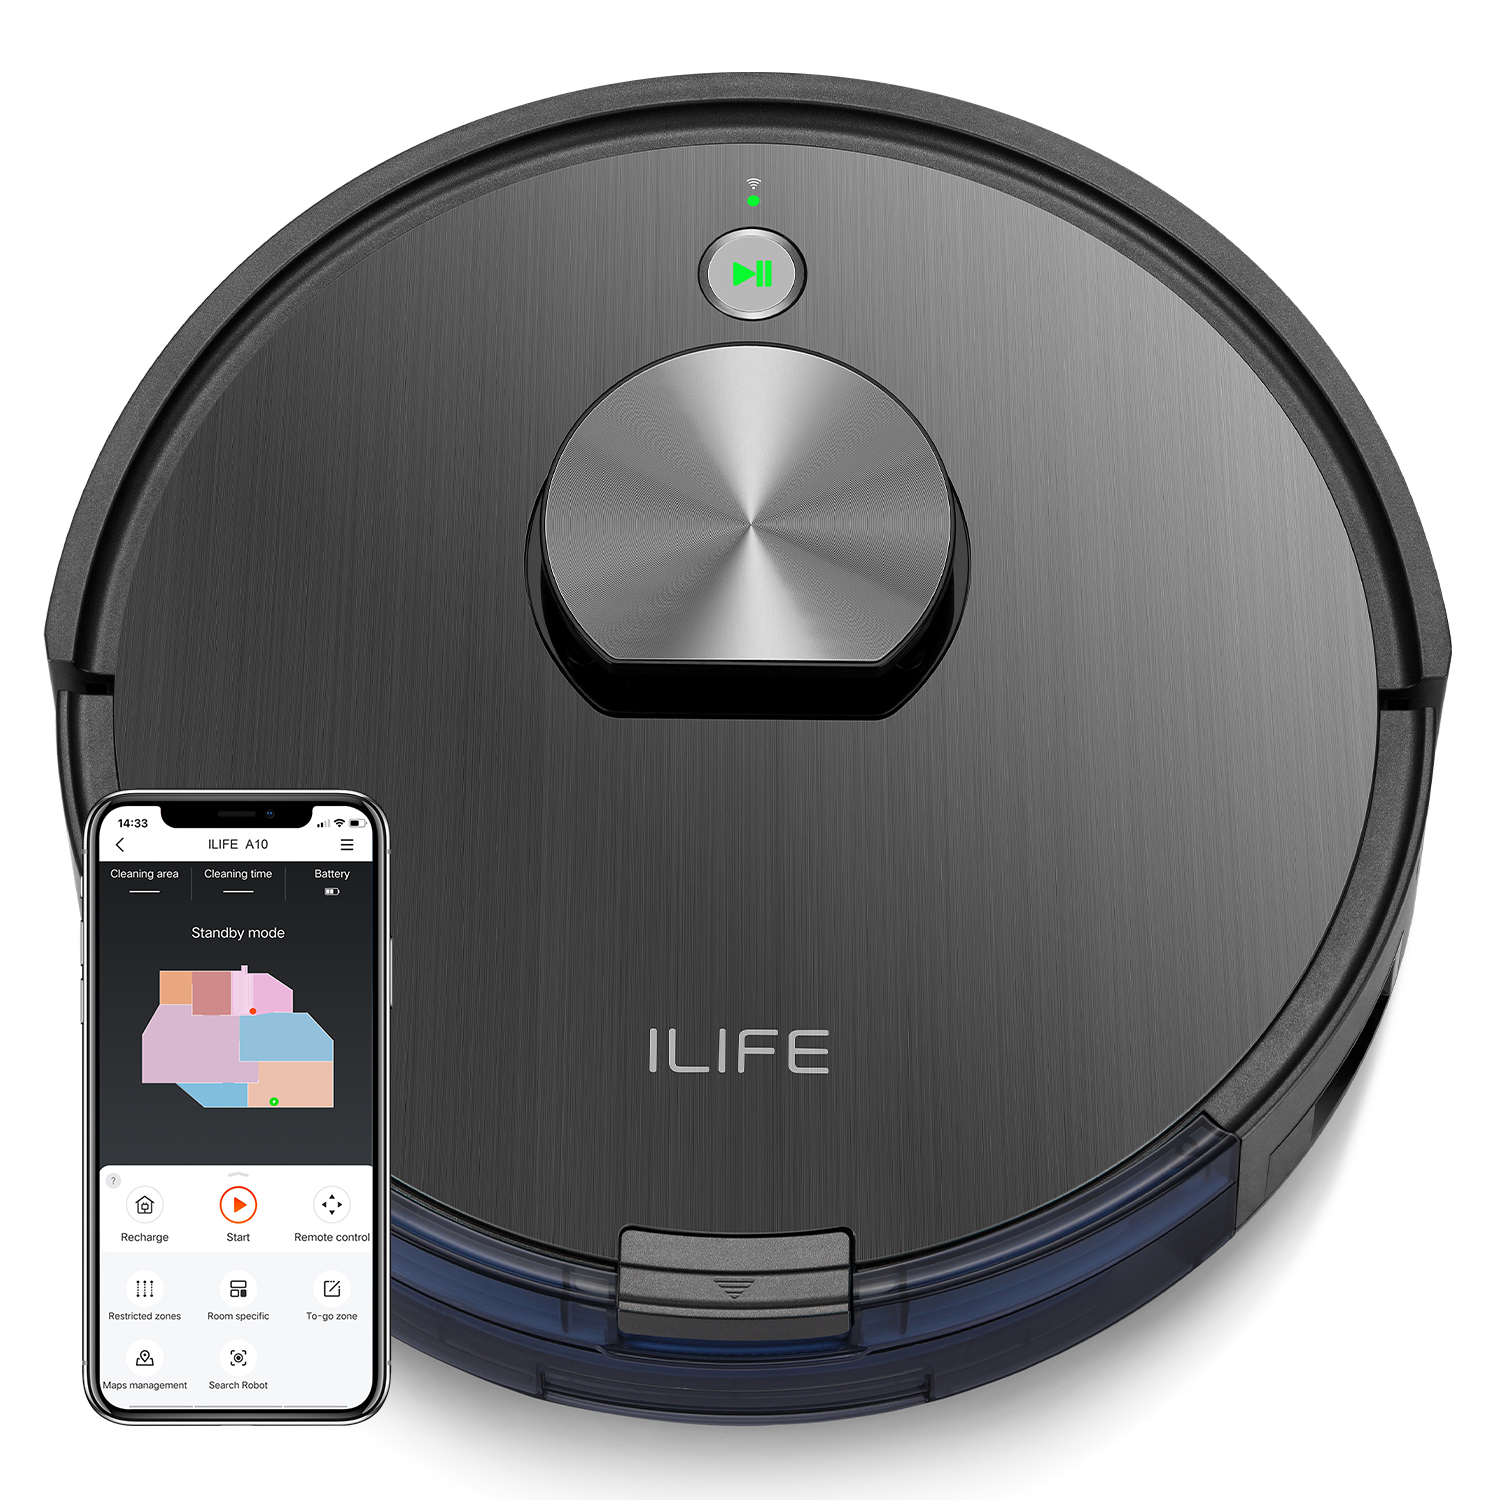 ILIFE A10-W Robot Vacuum Cleaner, Wi-Fi, Smart Laser Navigation, 2-in-1 Roller Brush，Mapping, Selective Room Cleaning, No-Go Zone, 2000 Pa - image 1 of 6